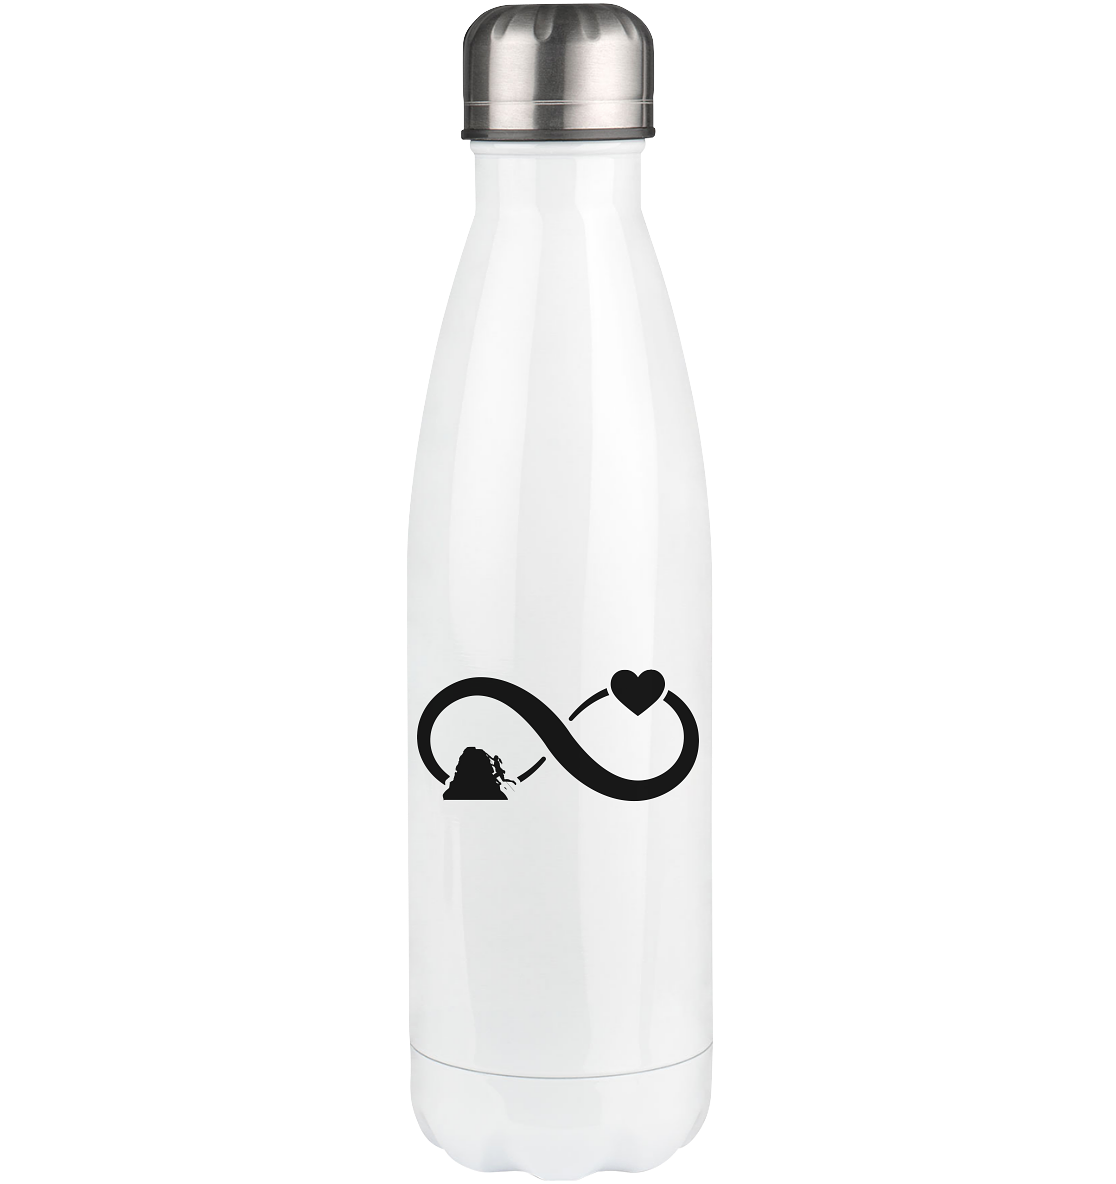 Infinity Heart and Climbing 1 - Edelstahl Thermosflasche klettern 500ml